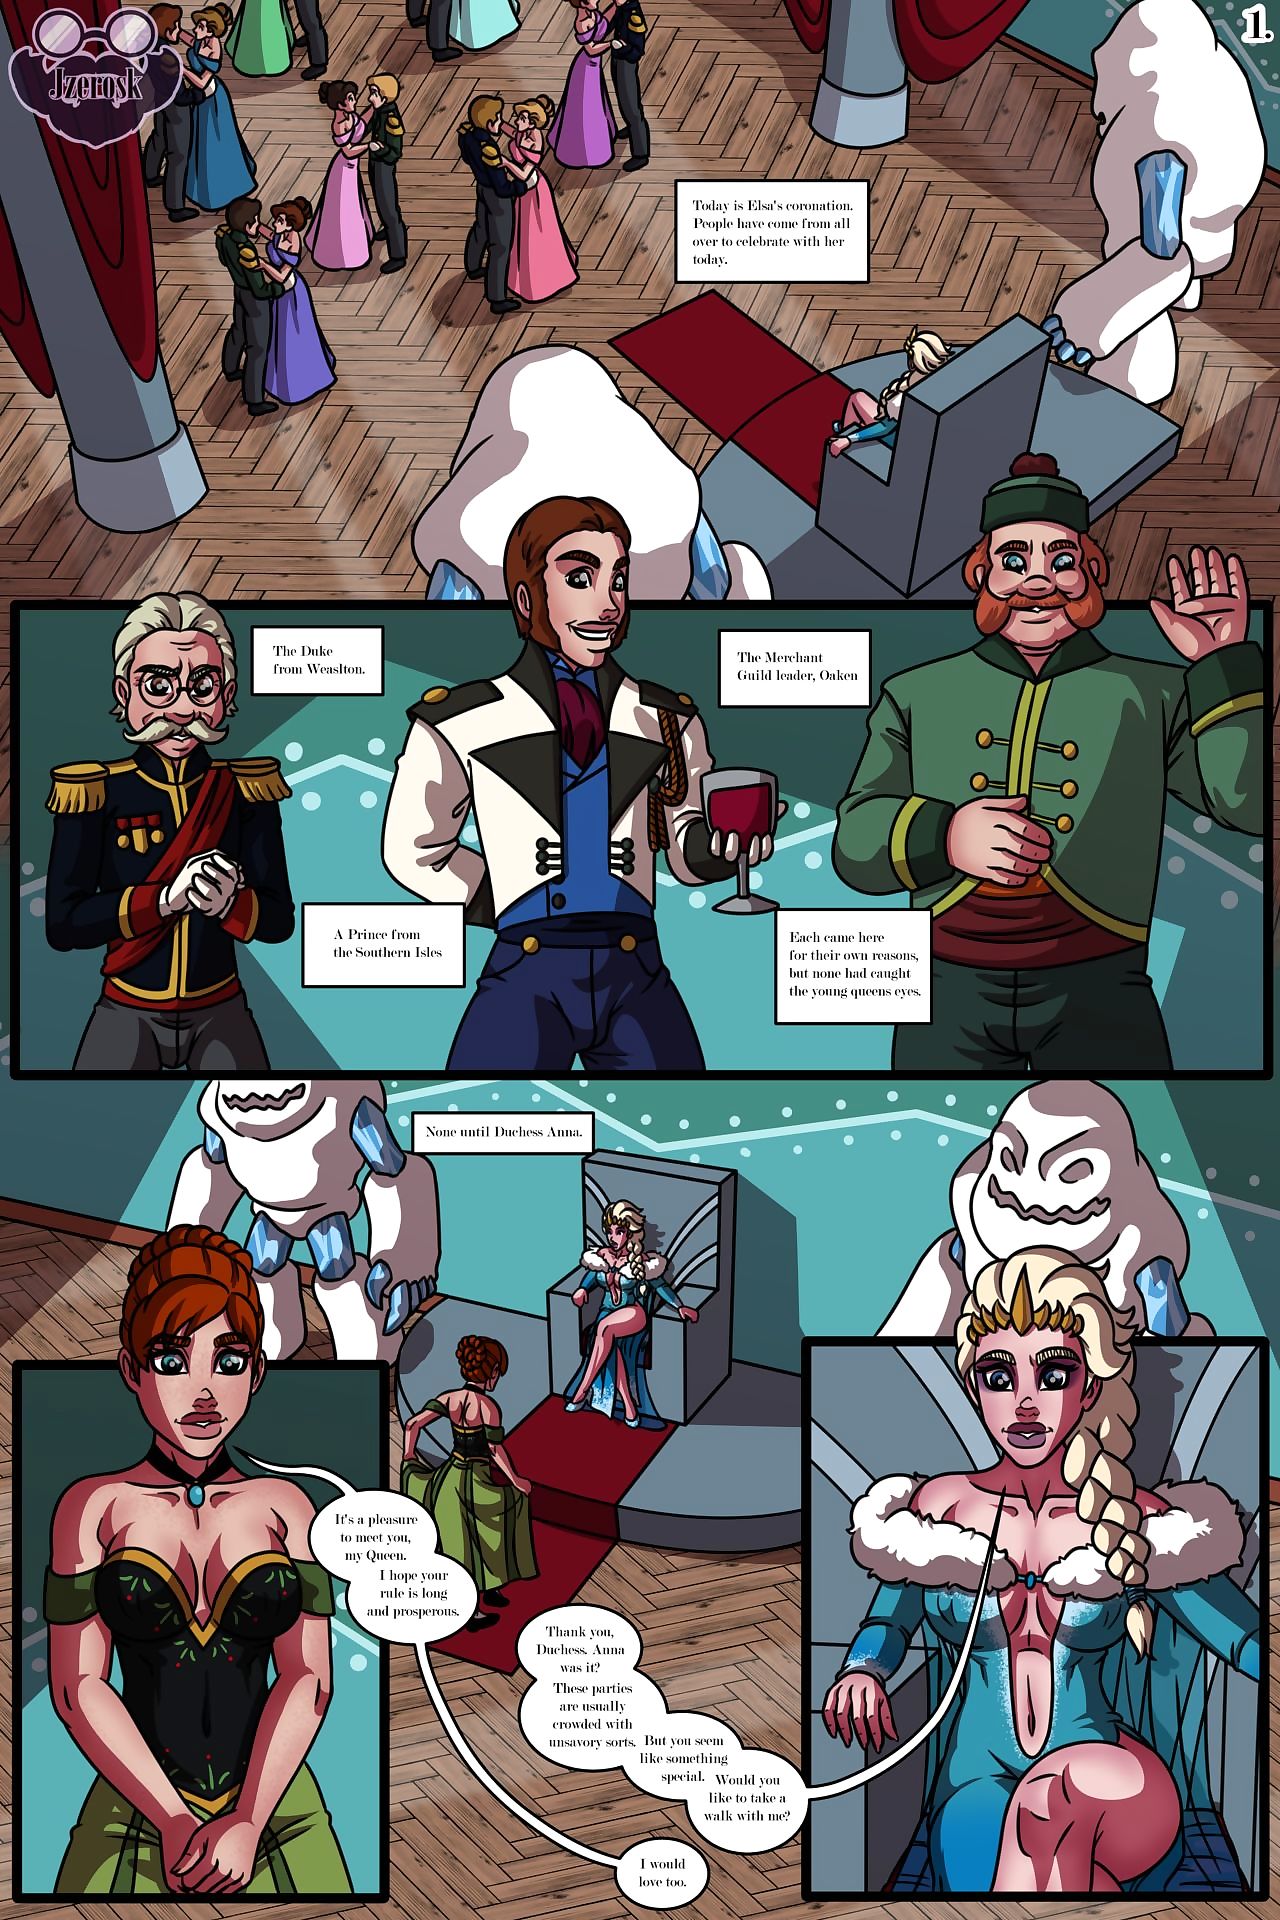 jzerosk 이 queen’s 바람 page 1